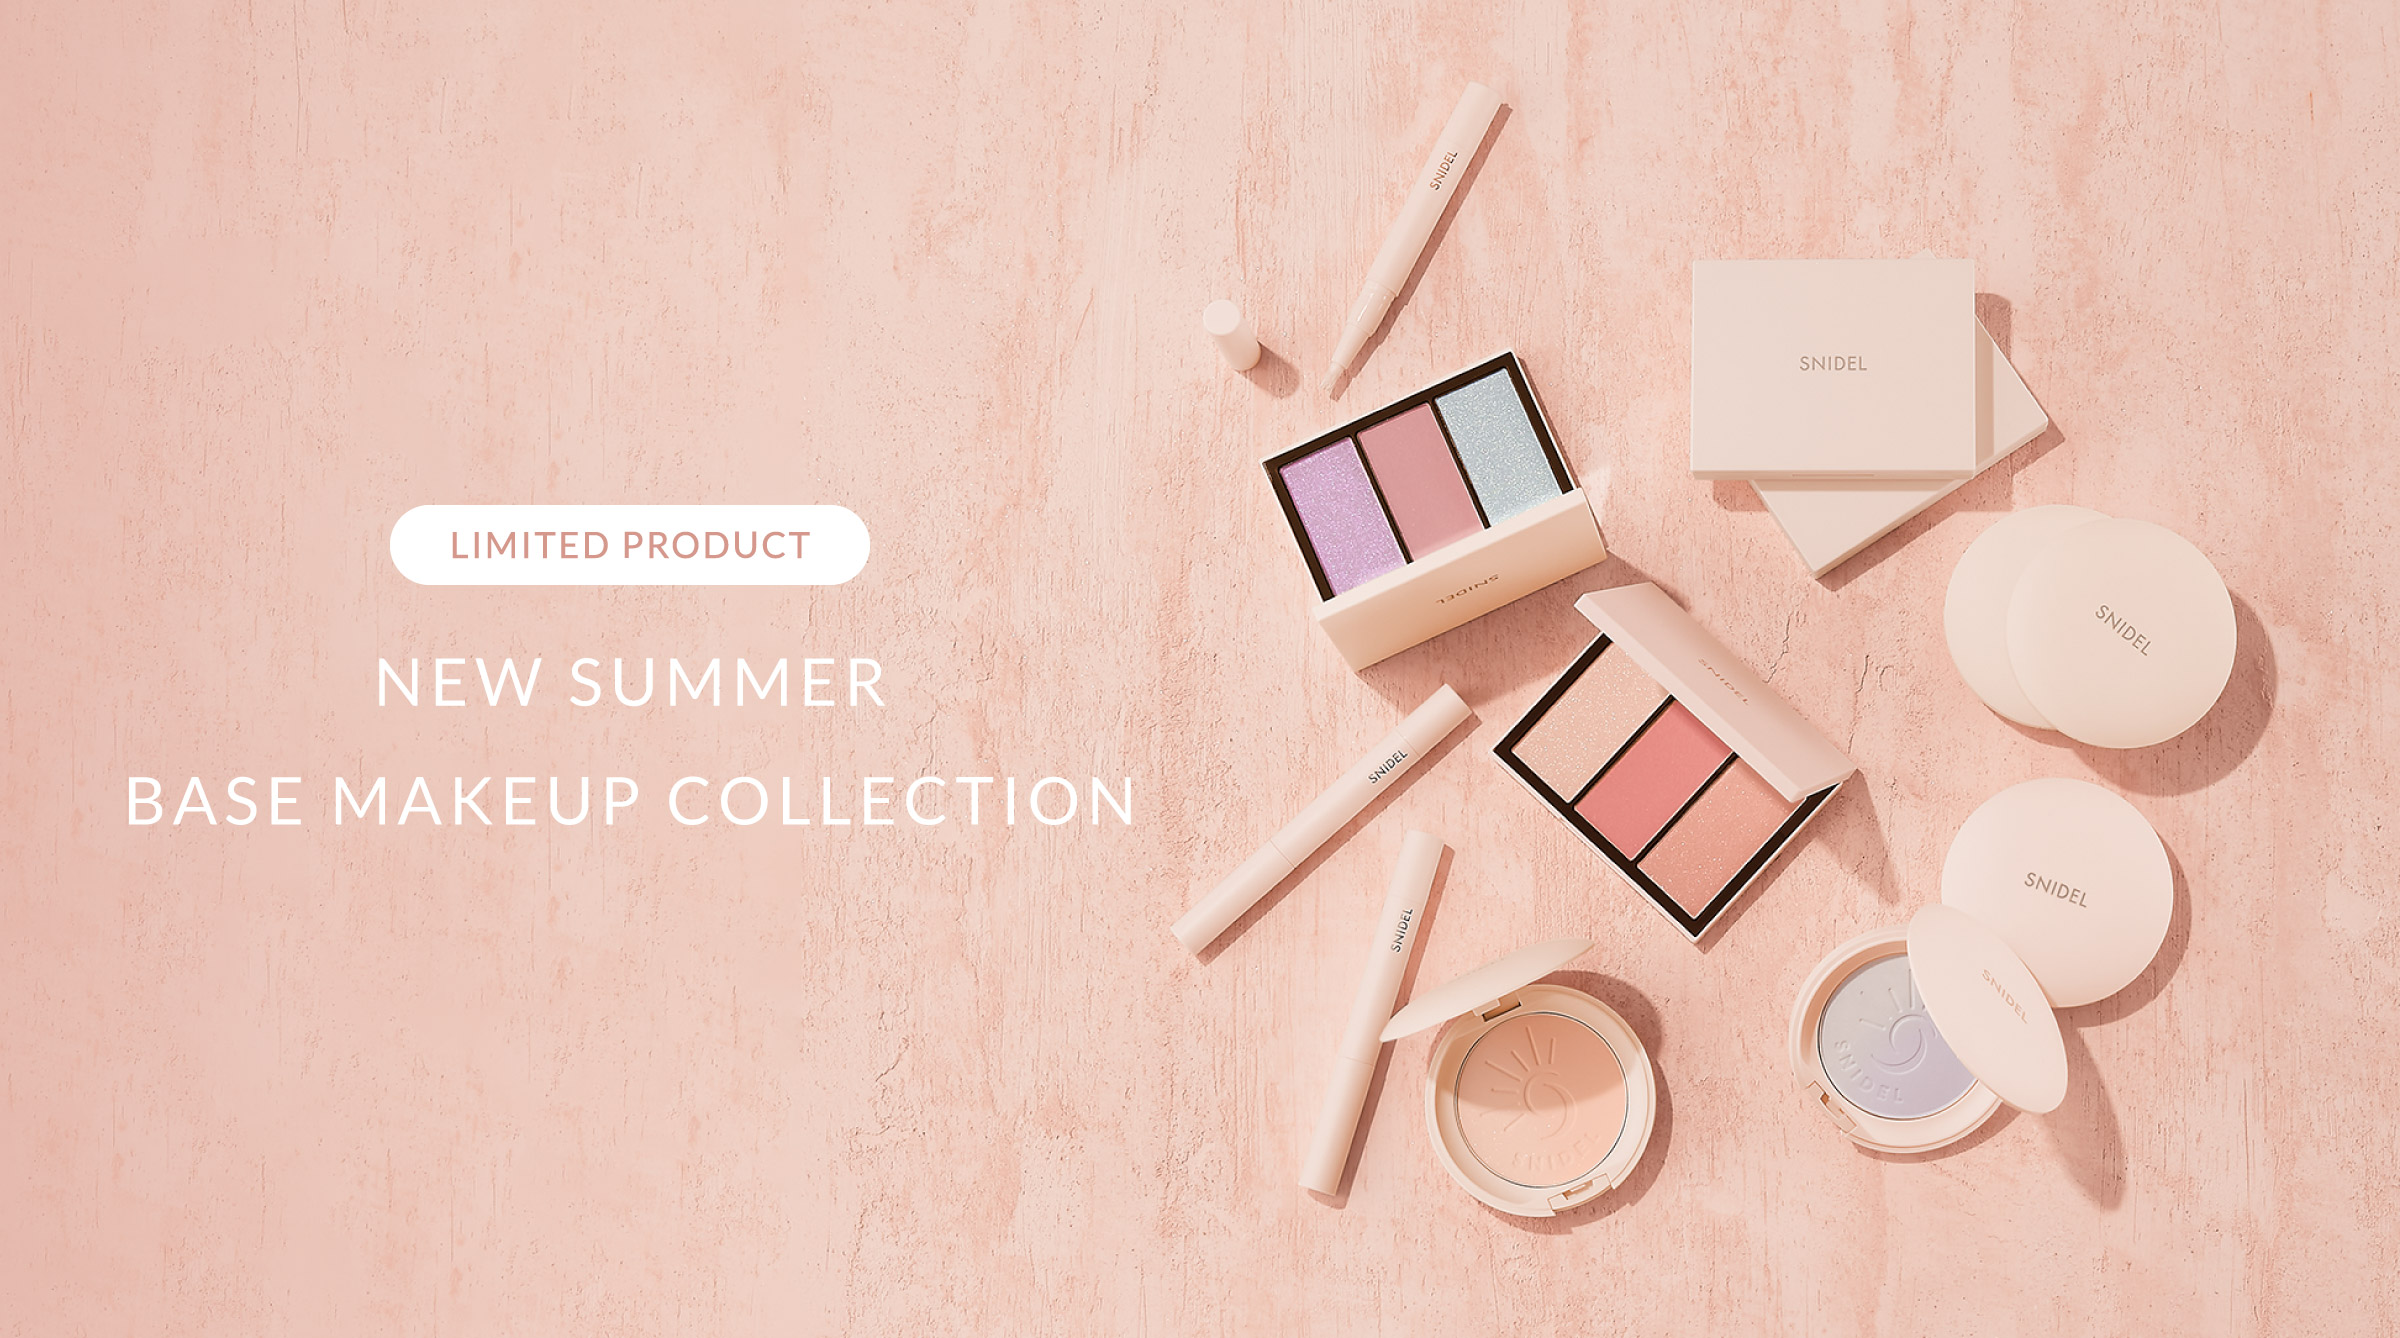 NEW SUMMER BASE MAKEUP COLLECTION